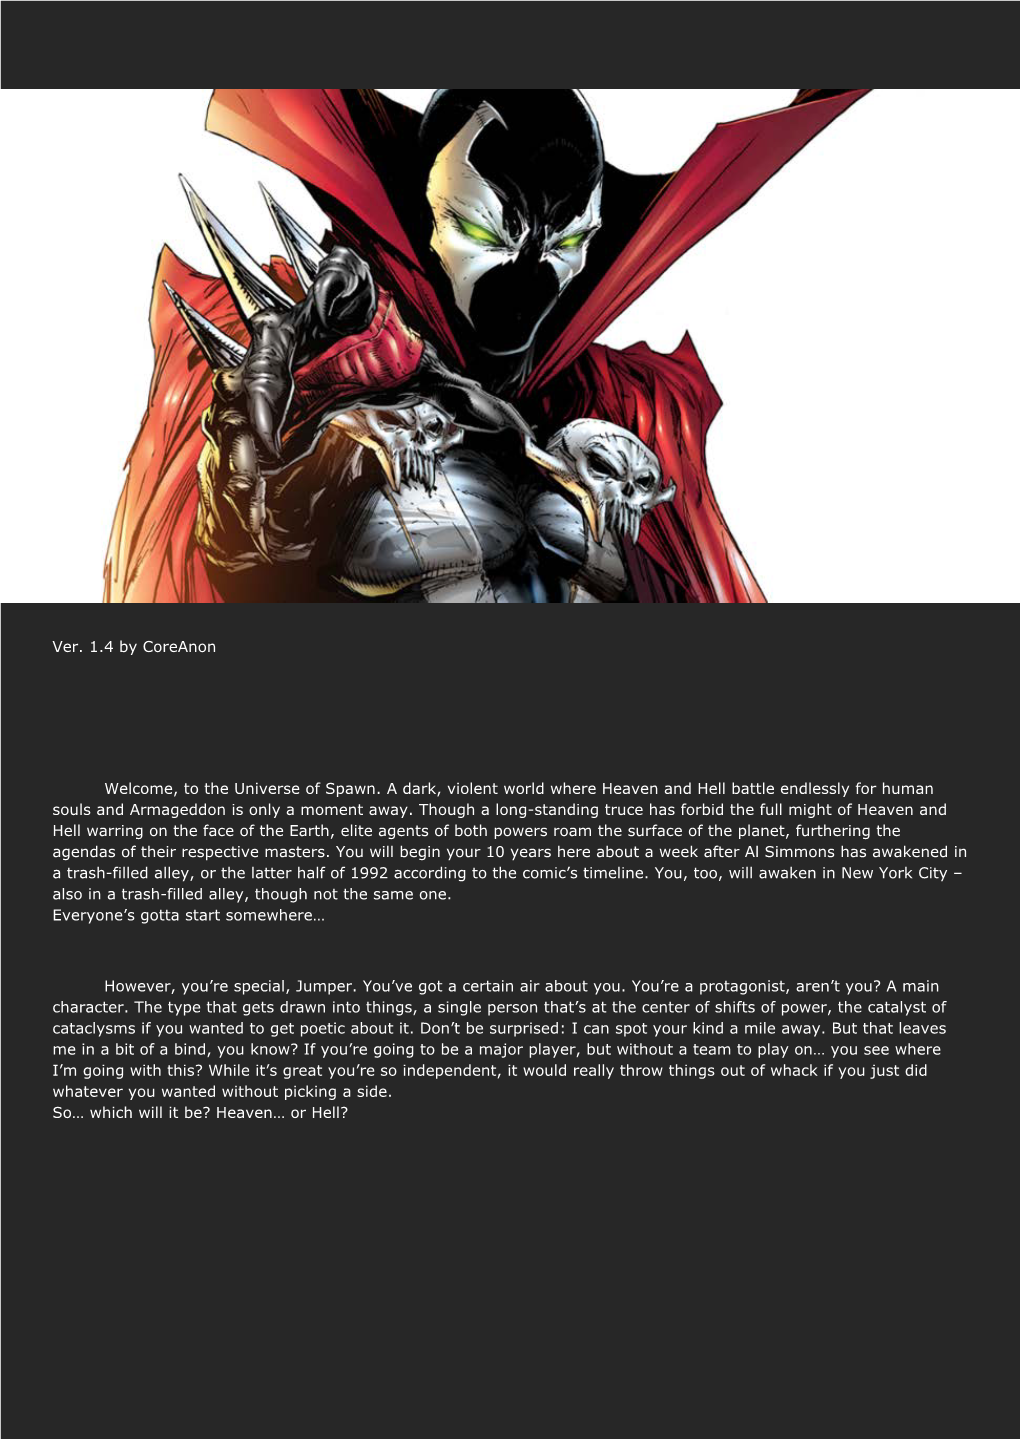 1.4 by Coreanon Welcome, to the Universe of Spawn. a Dark, Violent